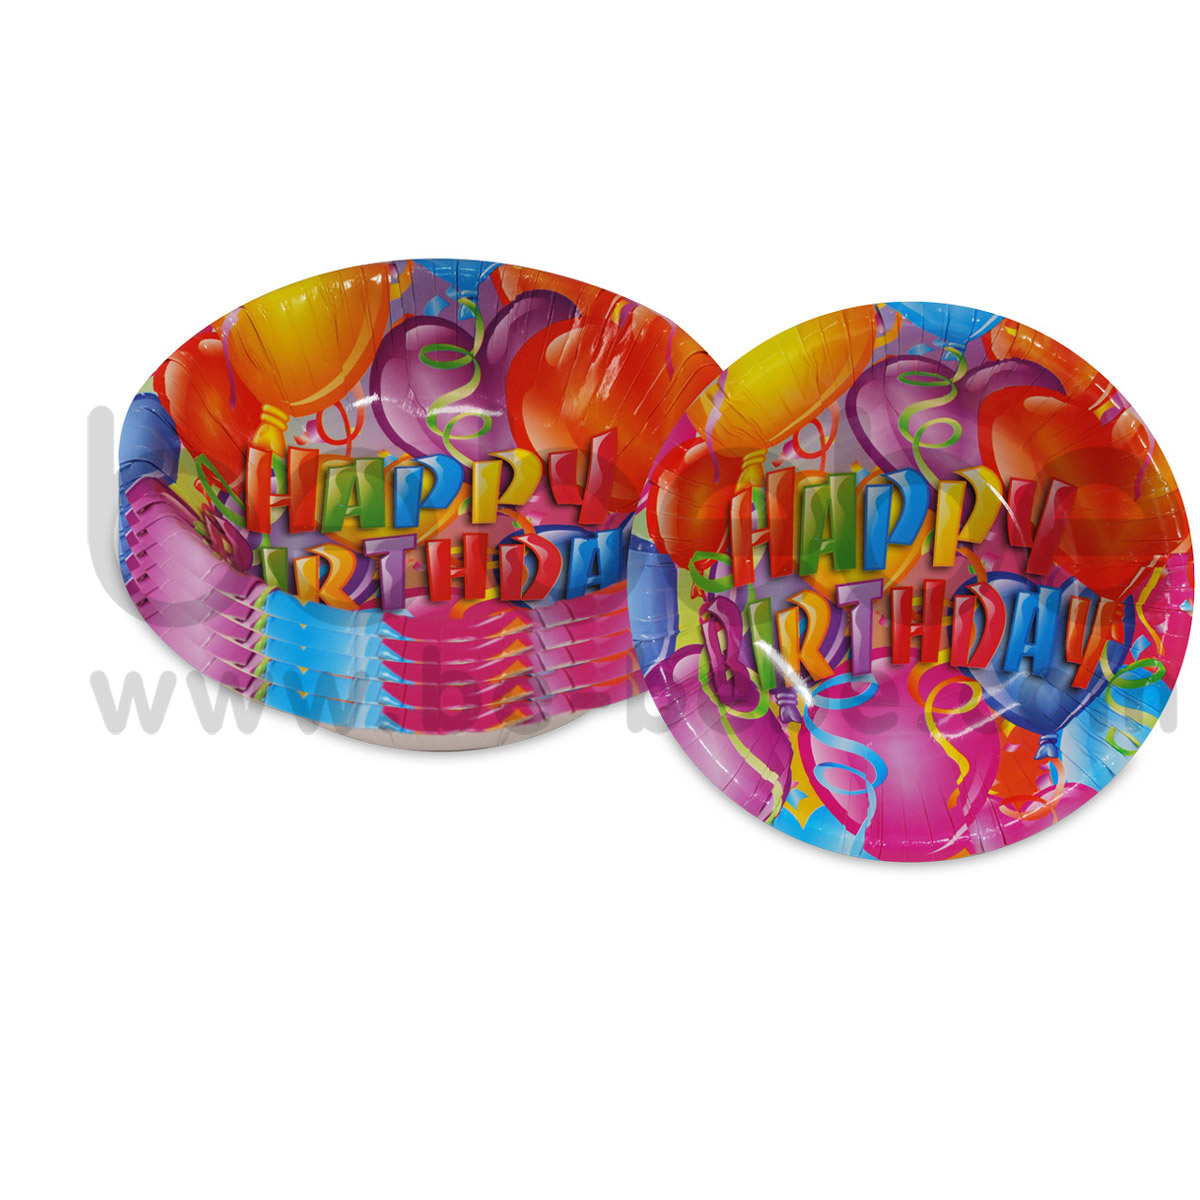 PARTY BUG : Paper bowl 6 inch., 1 Pack